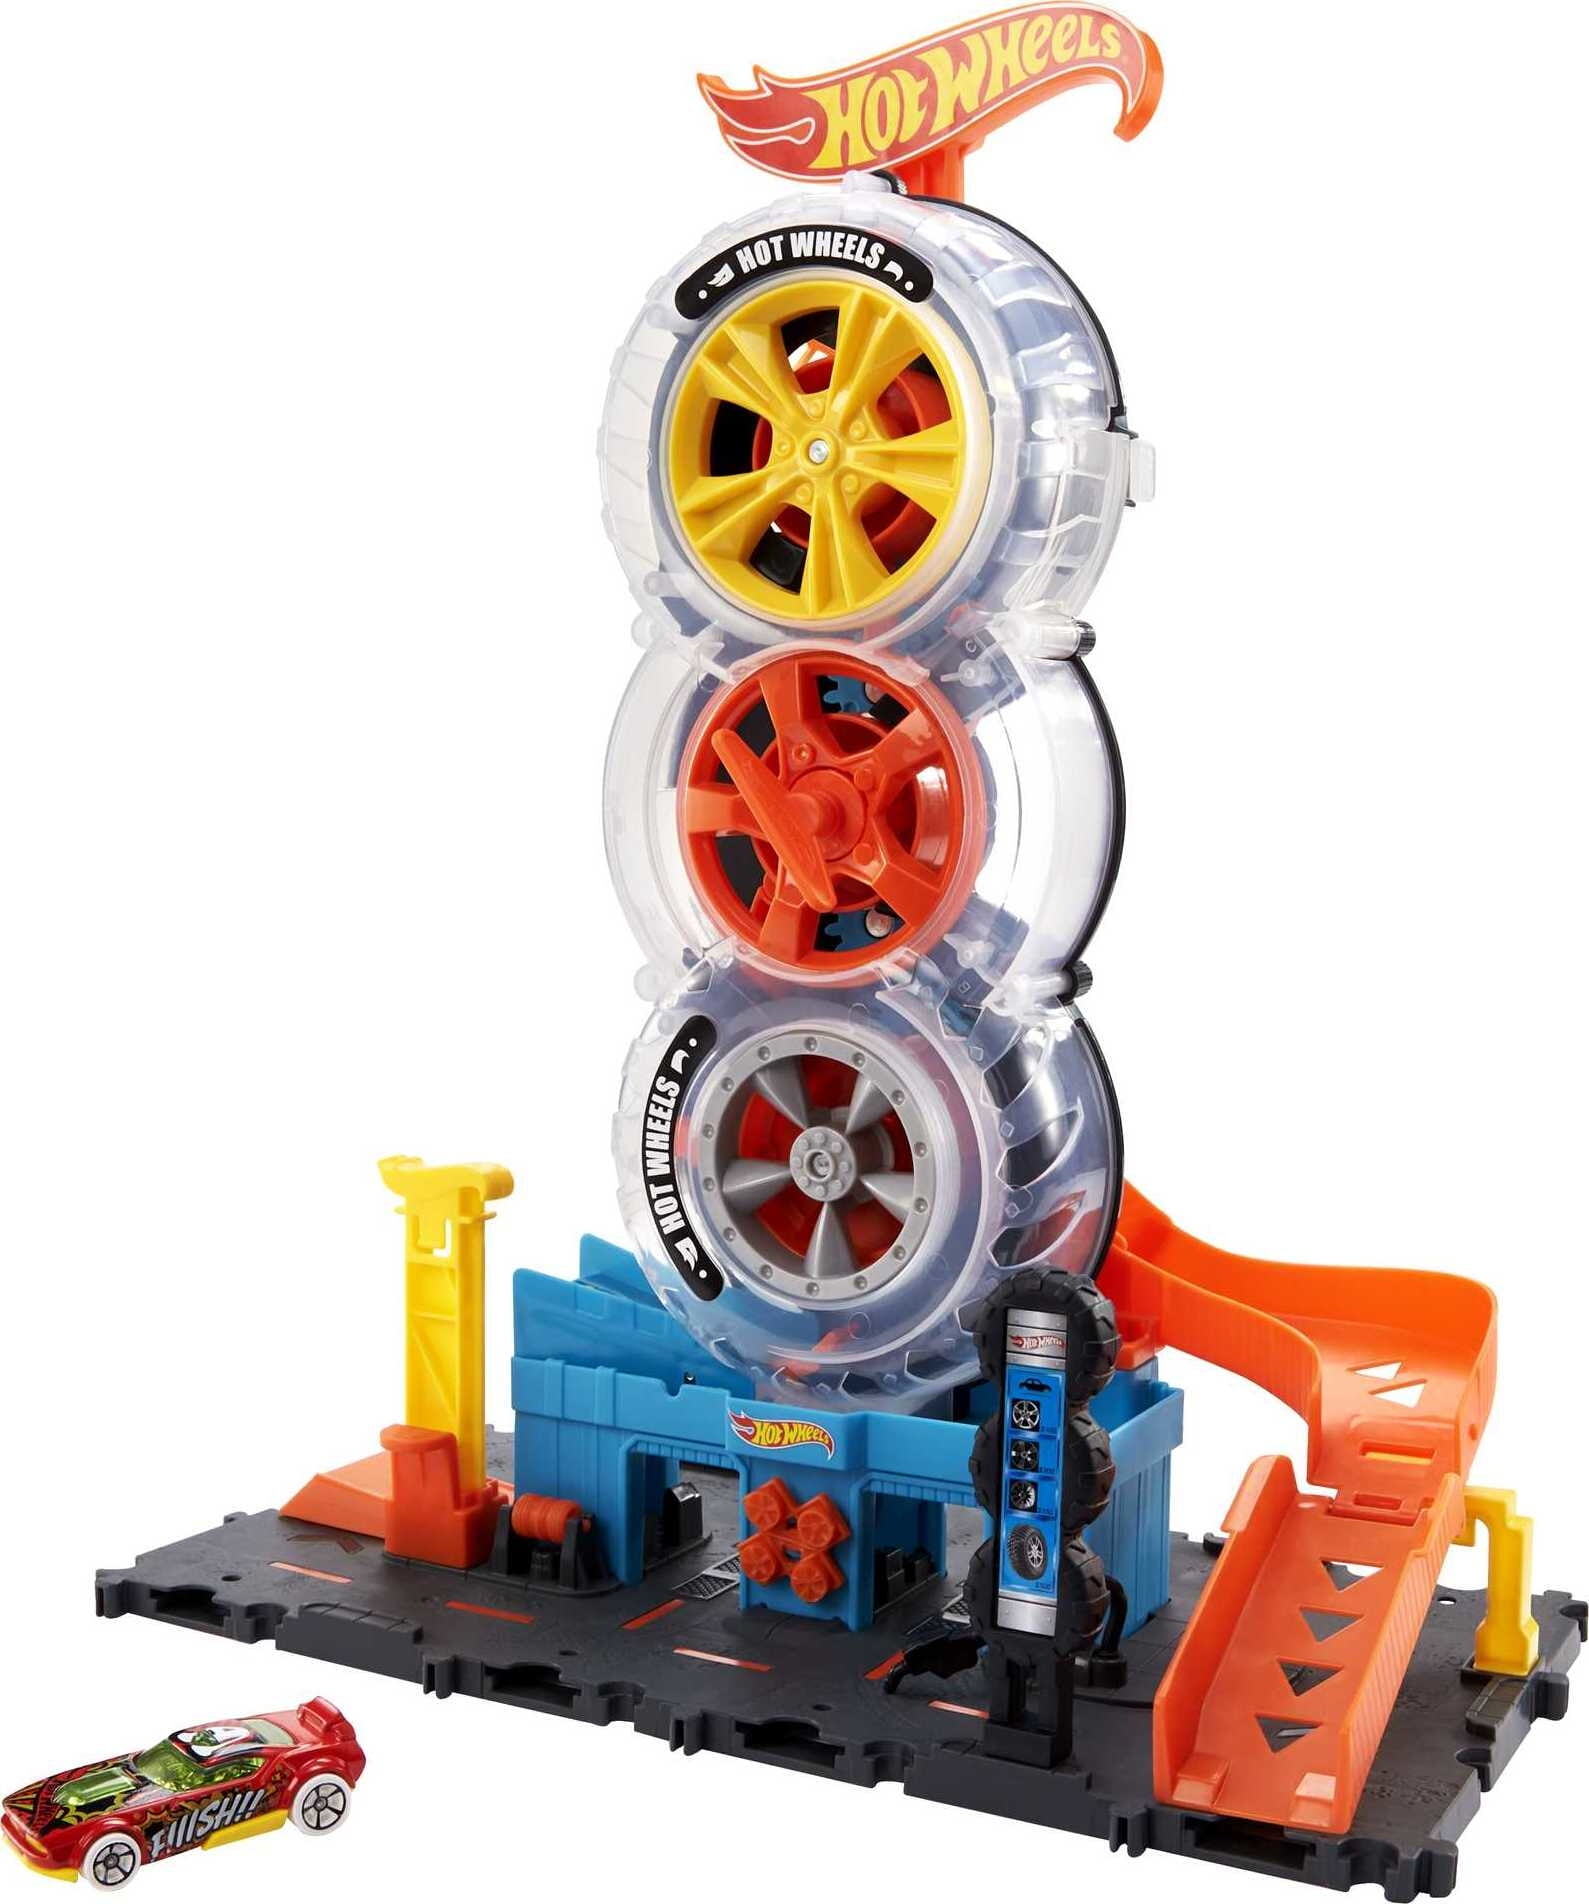 Hot Wheels City Super Twist Tire Shop Playset, Gift for Kids 4 to 8 Years Old